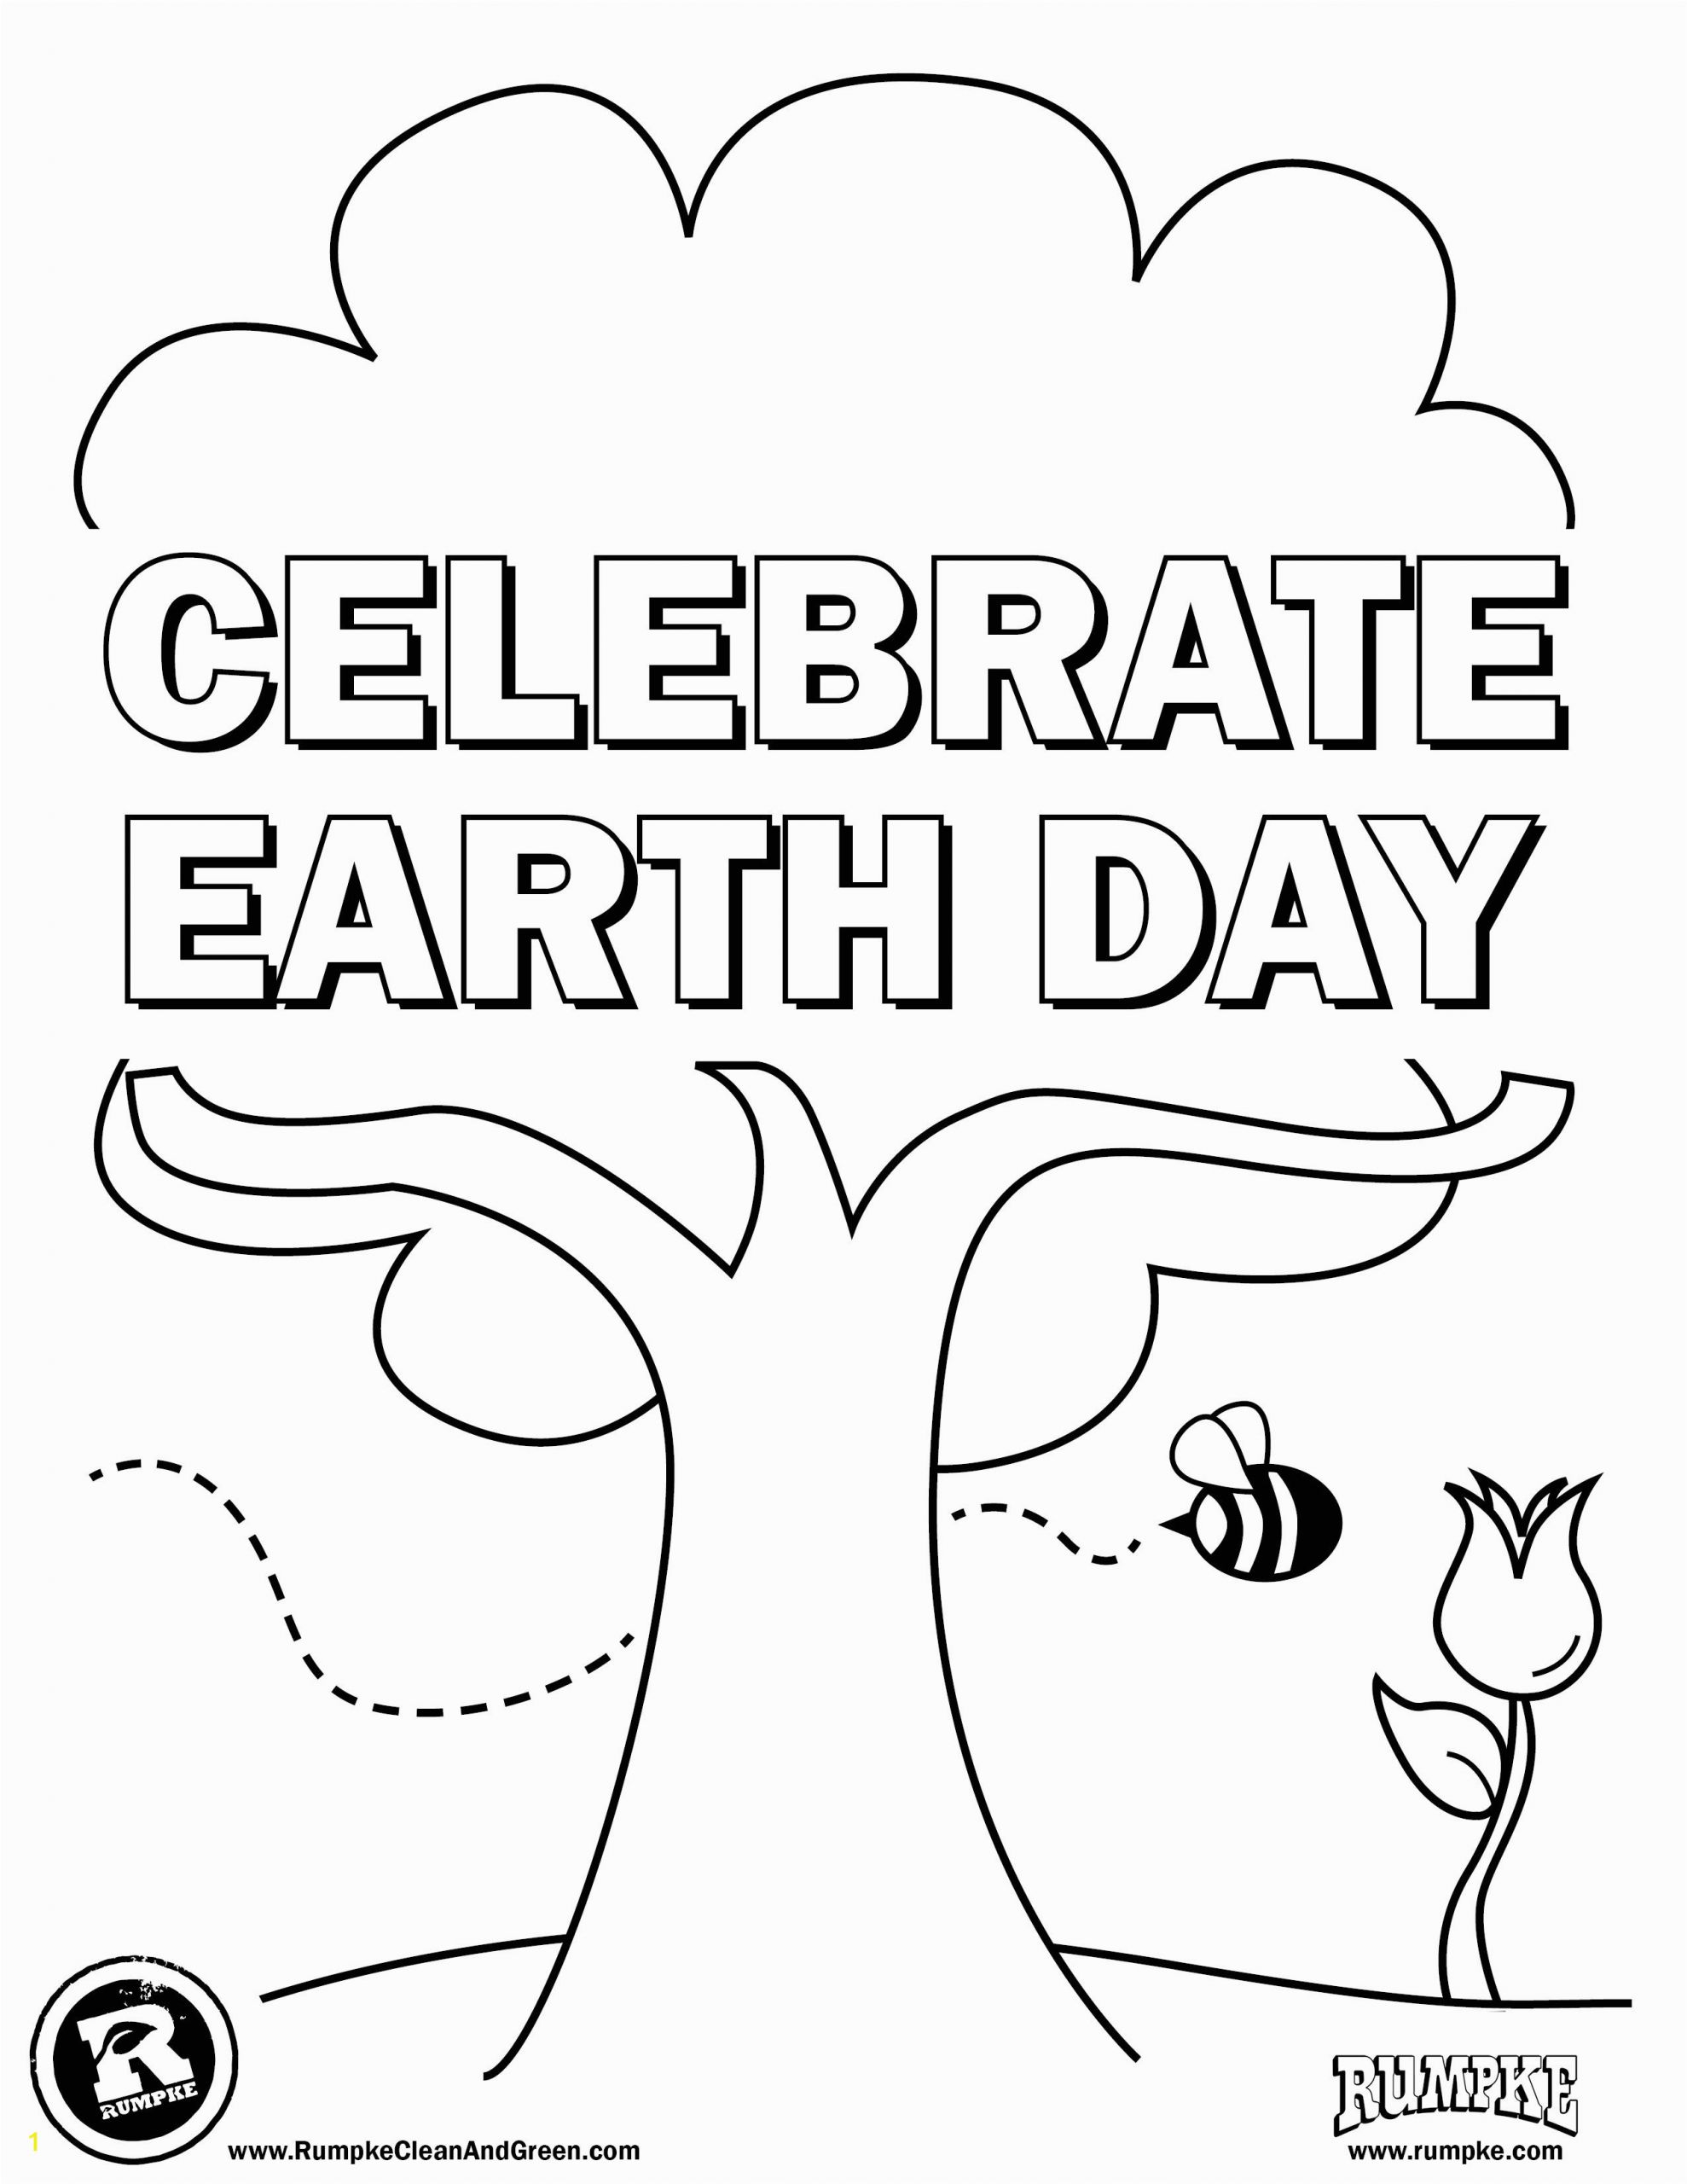 Coloring Pages for Earth Day Earth Day Coloring Sheet 2015